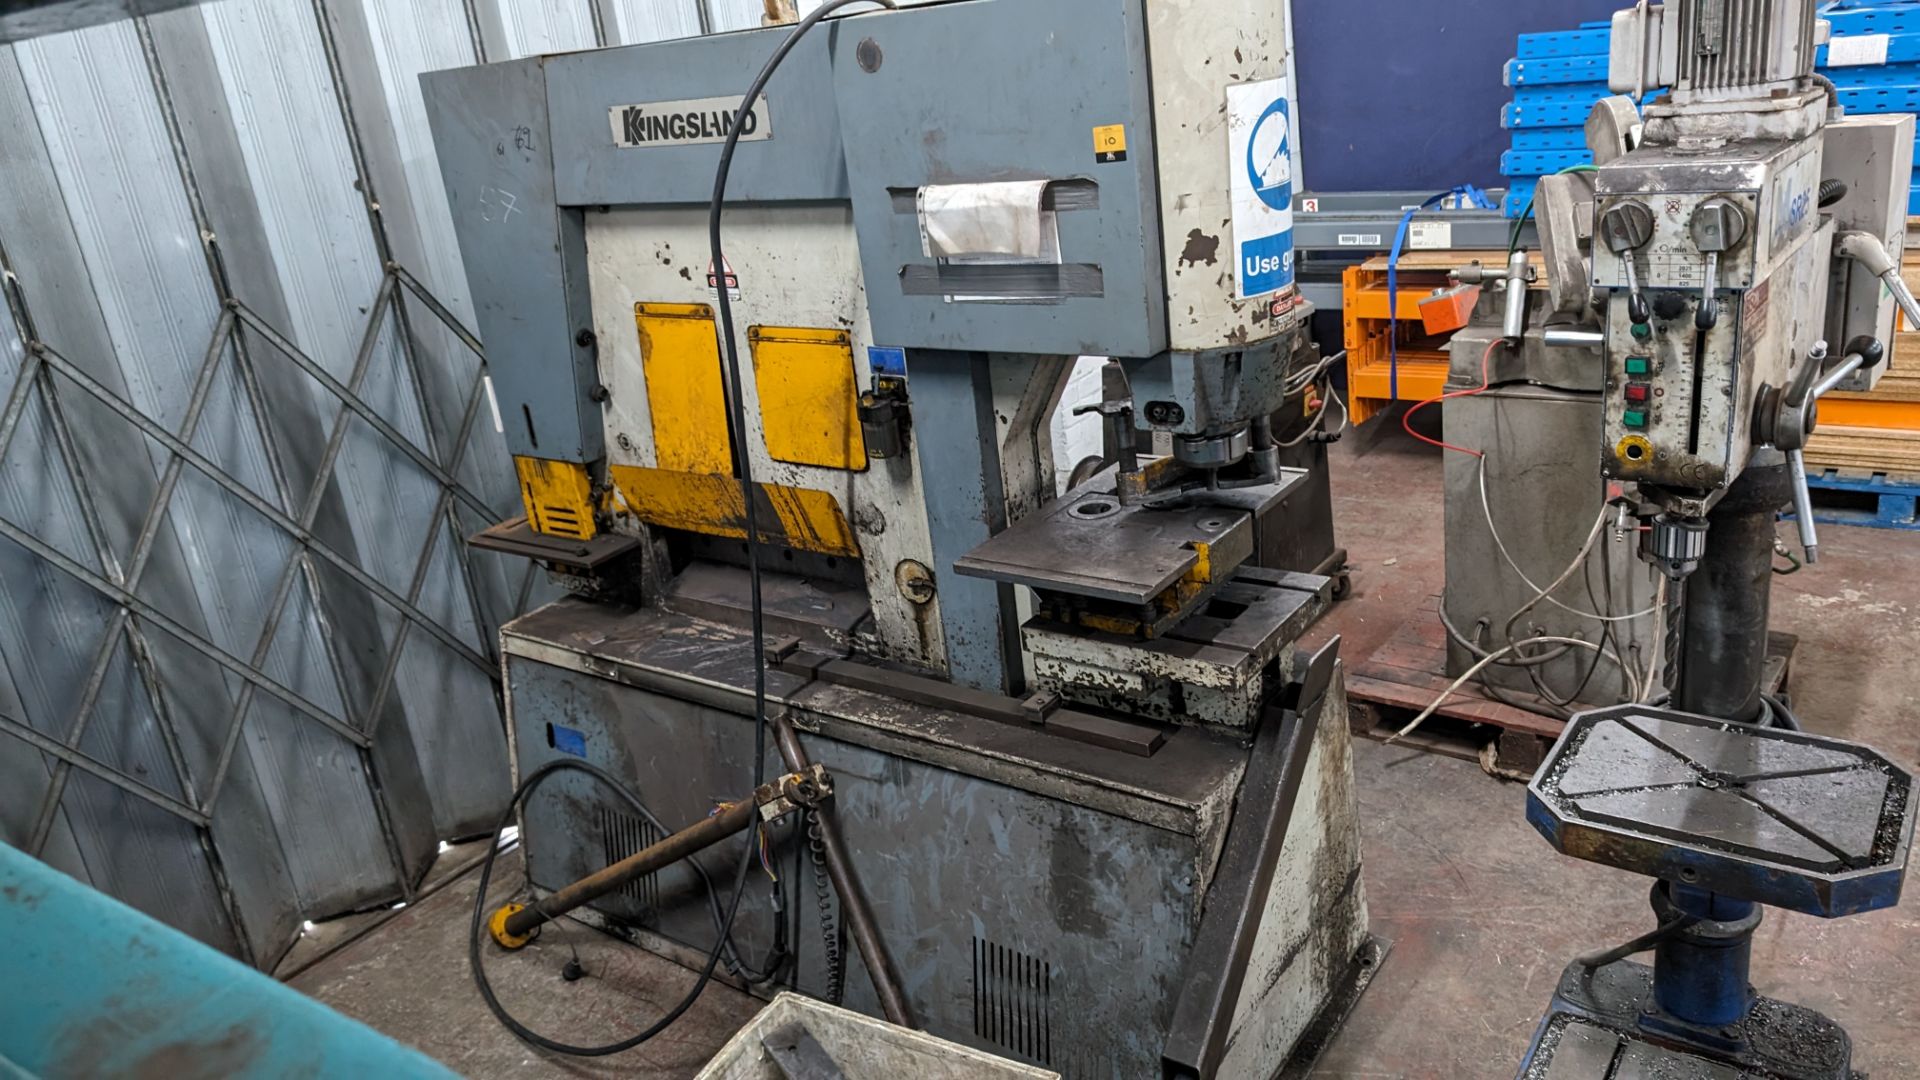 Kingsland multi 125 hydraulic metalworker, serial number 473906. Includes foot pedal plus tooling a - Image 22 of 22